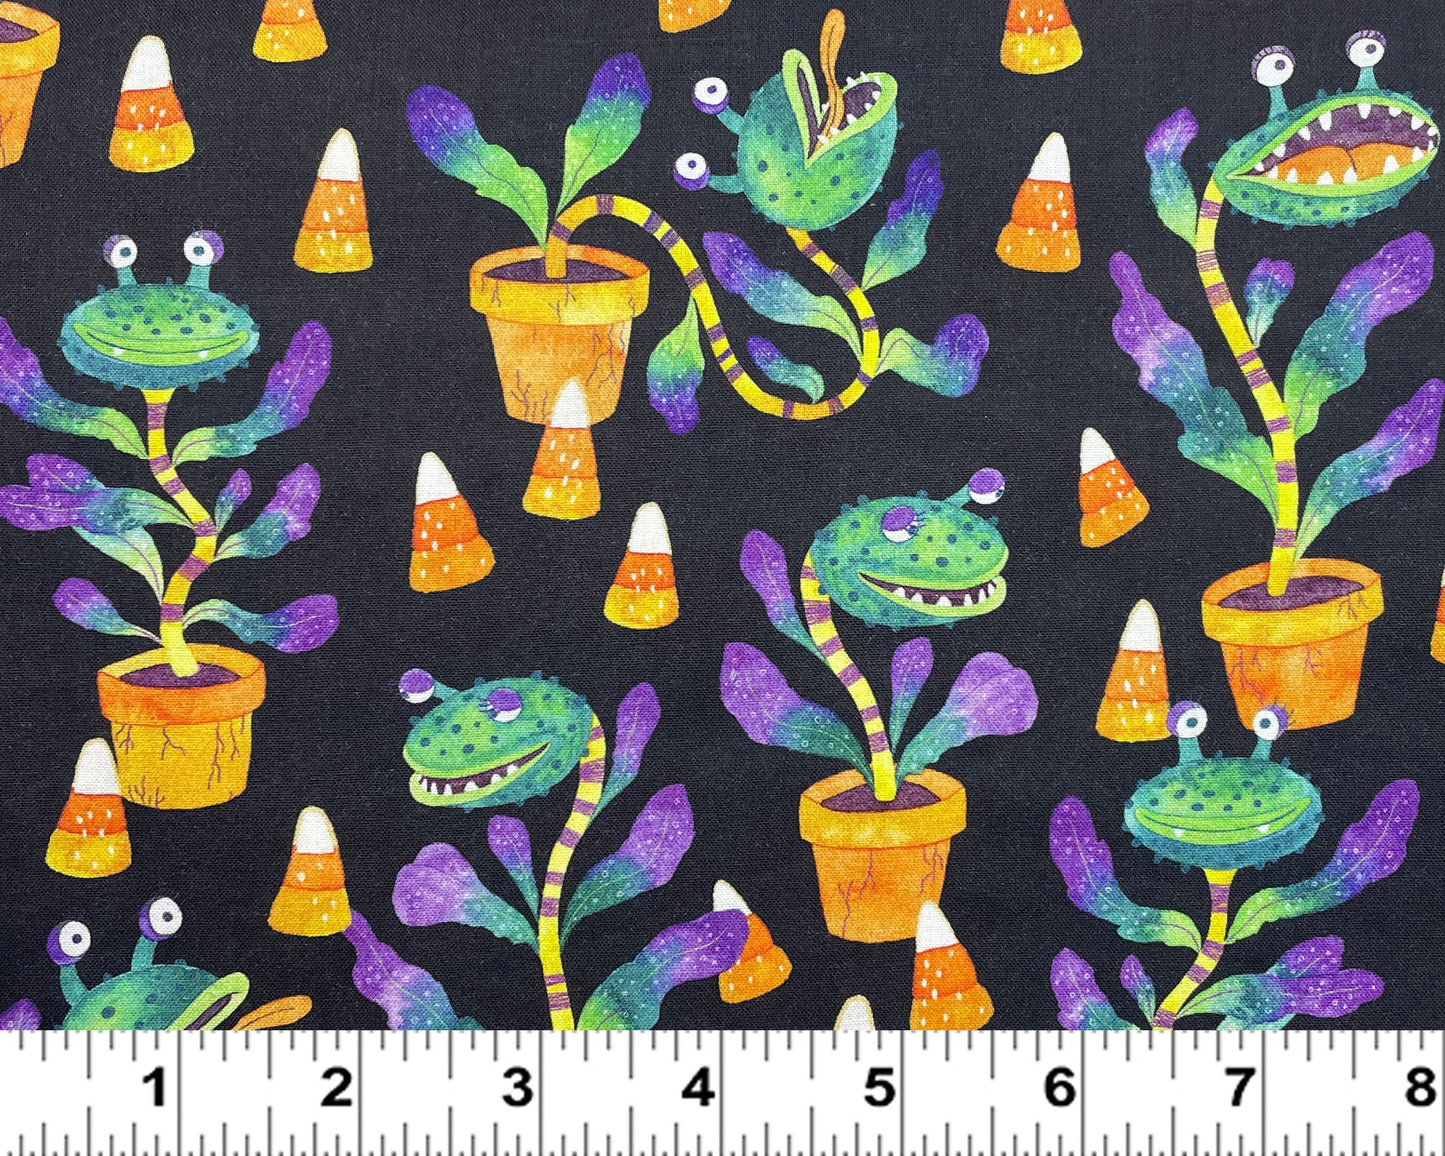 Plant Monsters - 100% Cotton Quilting Fabric - Little Shop of Horrors plant Audrey II Venus Fly Trap Halloween material - Ships NEXT DAY